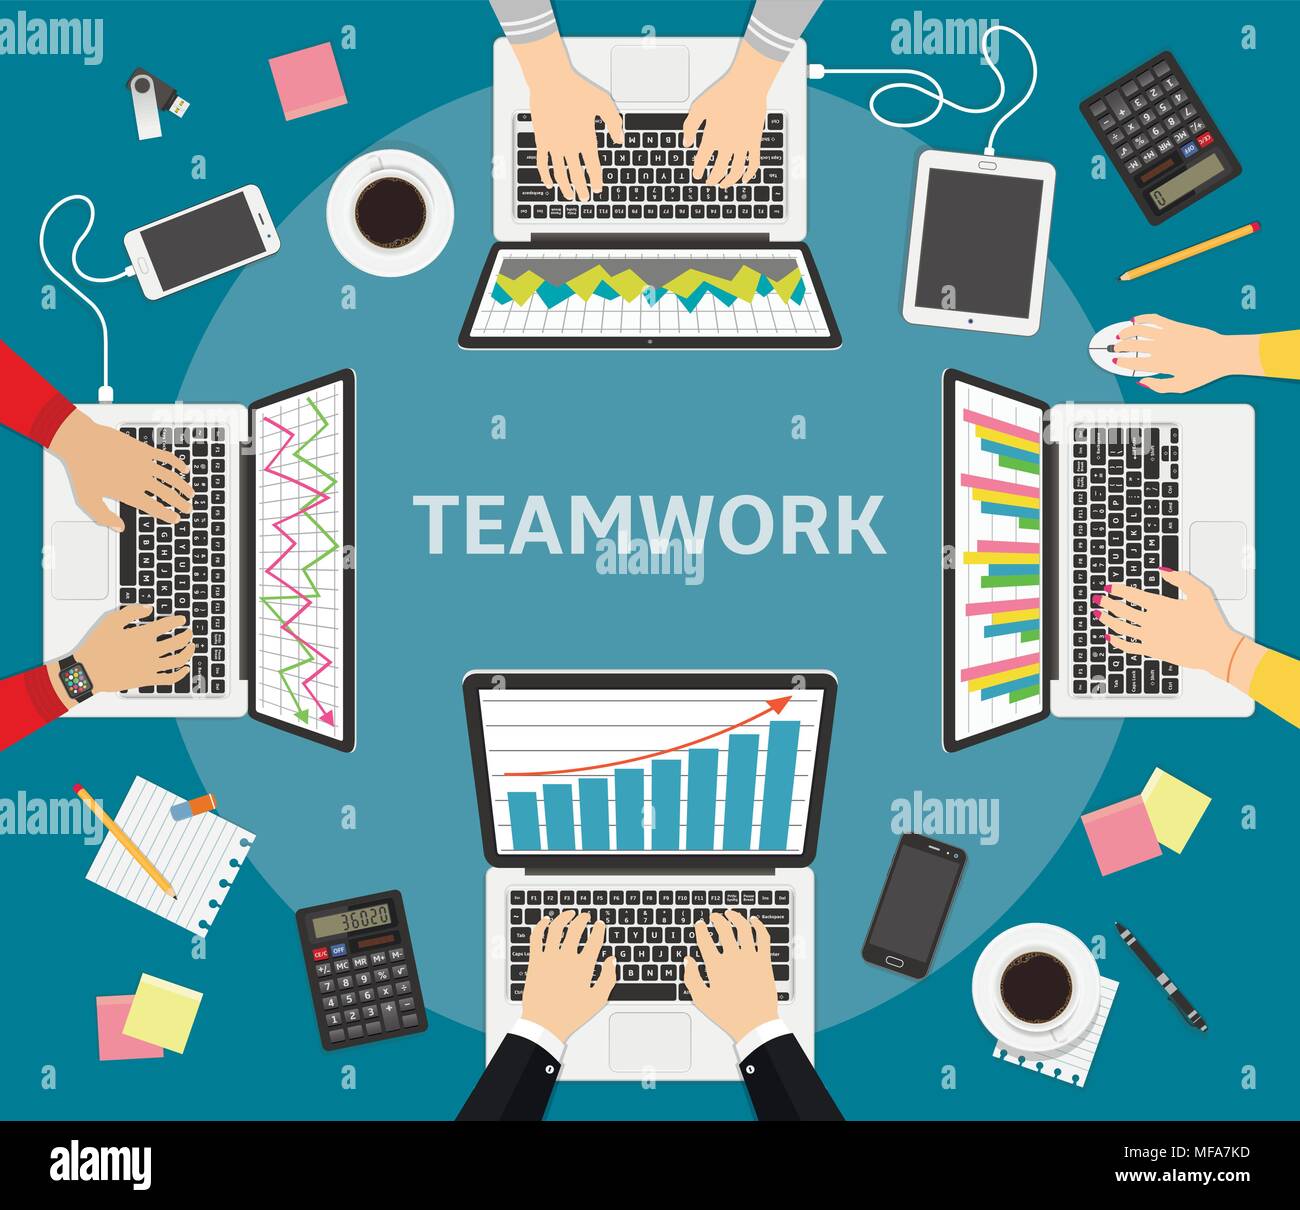 Teamwork on accounting, planning strategy, analysis, marketing research, financial management. Business meeting, teamwork, brainstorming. Team of busi Stock Vector